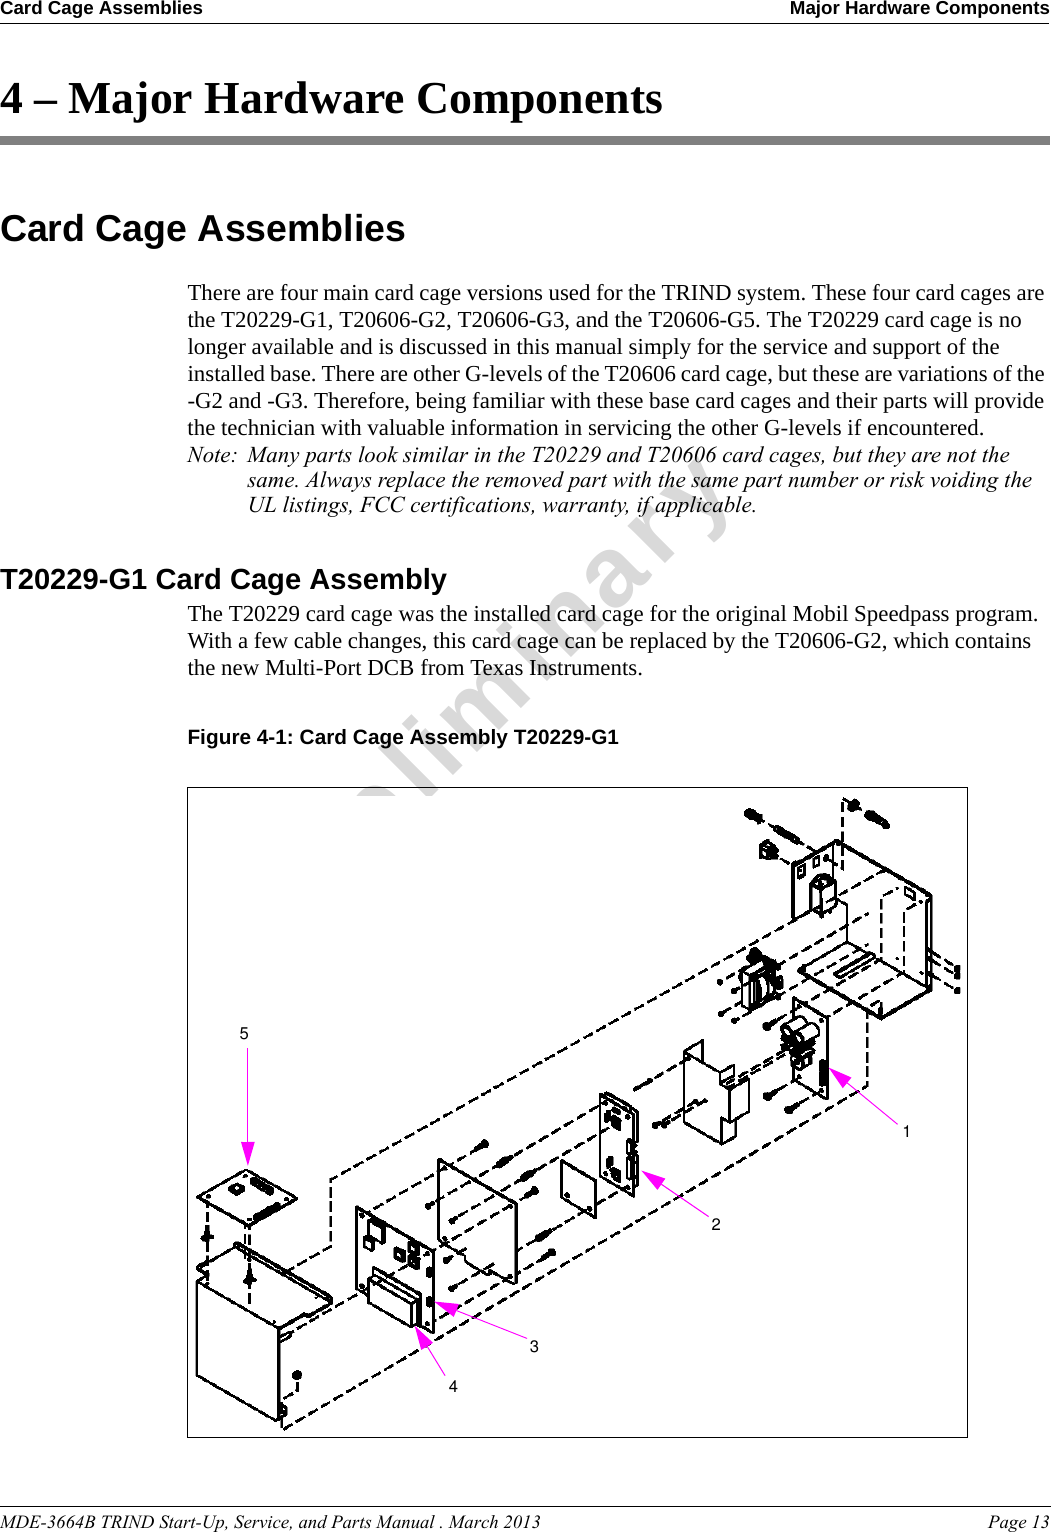 MDE-3664B TRIND Start-Up, Service, and Parts Manual . March 2013 Page 13Card Cage Assemblies Major Hardware ComponentsPreliminary4 – Major Hardware ComponentsCard Cage AssembliesThere are four main card cage versions used for the TRIND system. These four card cages are the T20229-G1, T20606-G2, T20606-G3, and the T20606-G5. The T20229 card cage is no longer available and is discussed in this manual simply for the service and support of the installed base. There are other G-levels of the T20606 card cage, but these are variations of the -G2 and -G3. Therefore, being familiar with these base card cages and their parts will provide the technician with valuable information in servicing the other G-levels if encountered. Note: Many parts look similar in the T20229 and T20606 card cages, but they are not the same. Always replace the removed part with the same part number or risk voiding the UL listings, FCC certifications, warranty, if applicable.T20229-G1 Card Cage AssemblyThe T20229 card cage was the installed card cage for the original Mobil Speedpass program. With a few cable changes, this card cage can be replaced by the T20606-G2, which contains the new Multi-Port DCB from Texas Instruments.Figure 4-1: Card Cage Assembly T20229-G112354